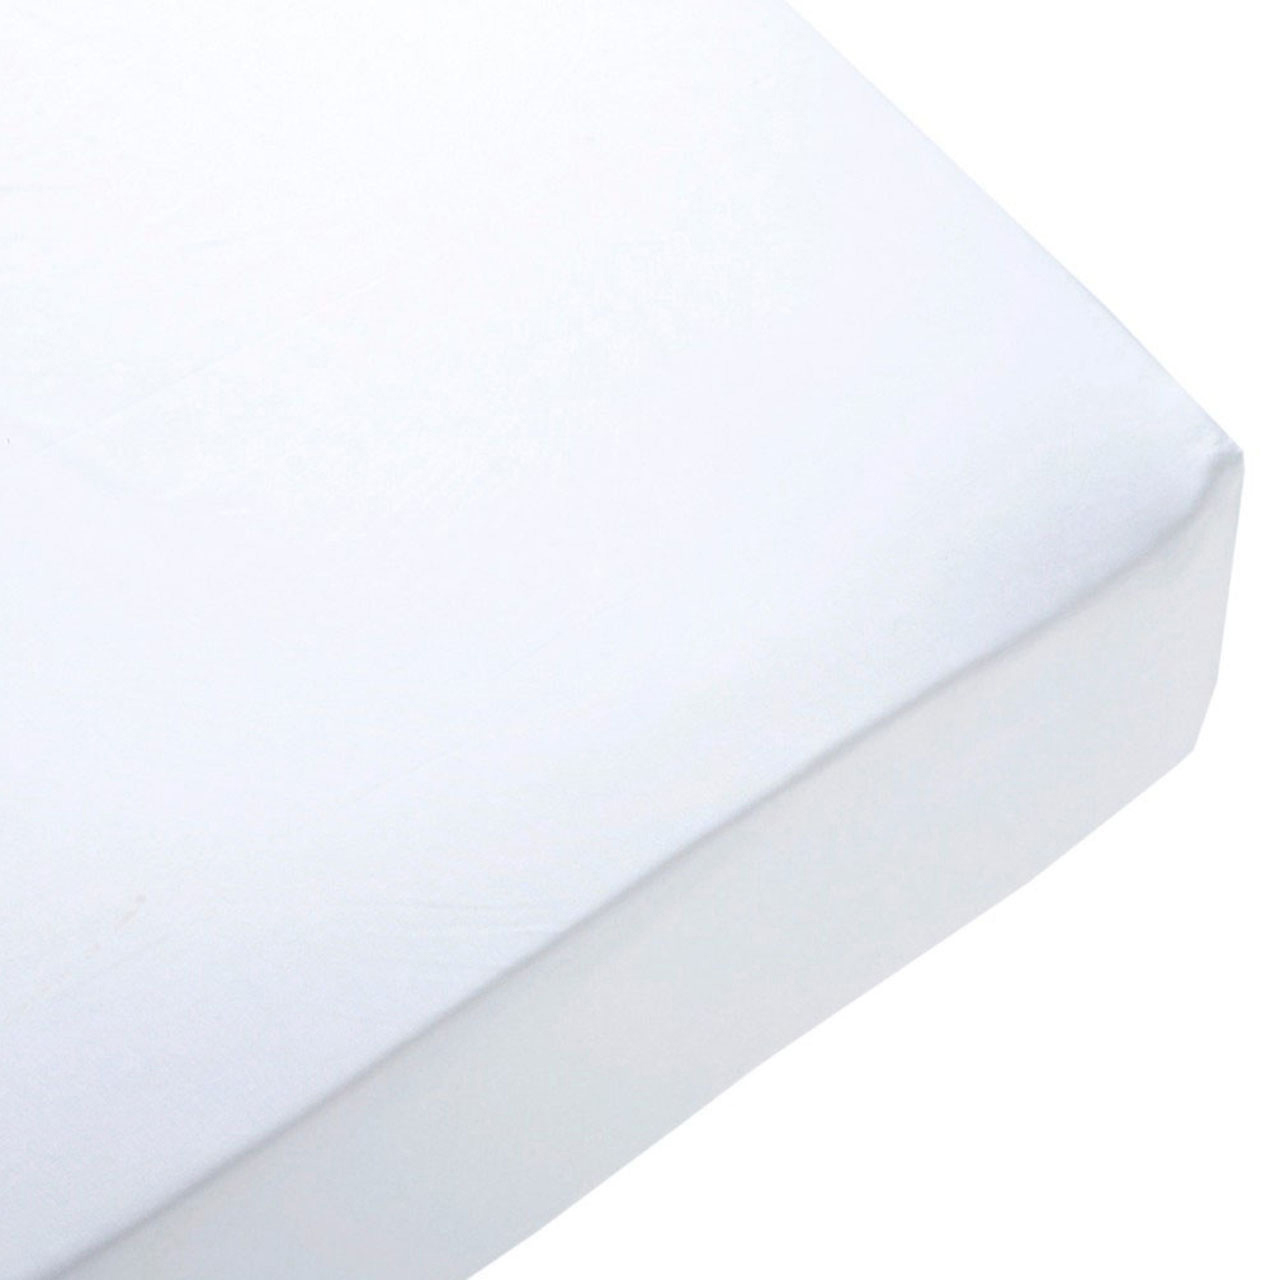 200 Thread Count Egyptian Cotton Deep Fitted Sheet